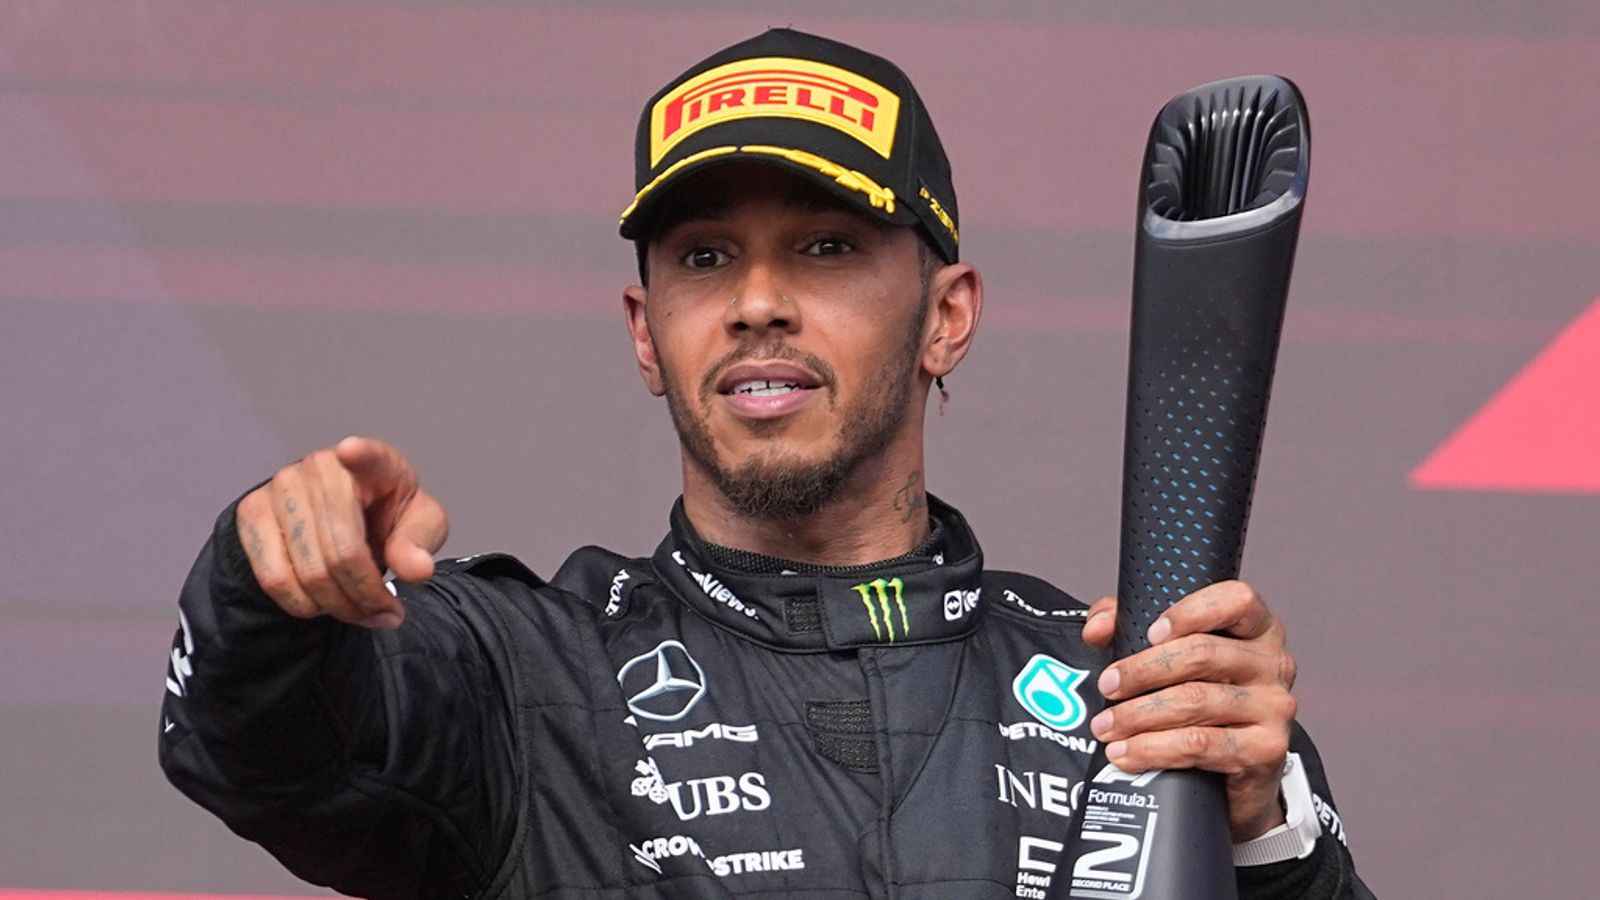 Lewis Hamilton disqualified from US Grand Prix after second-place finish